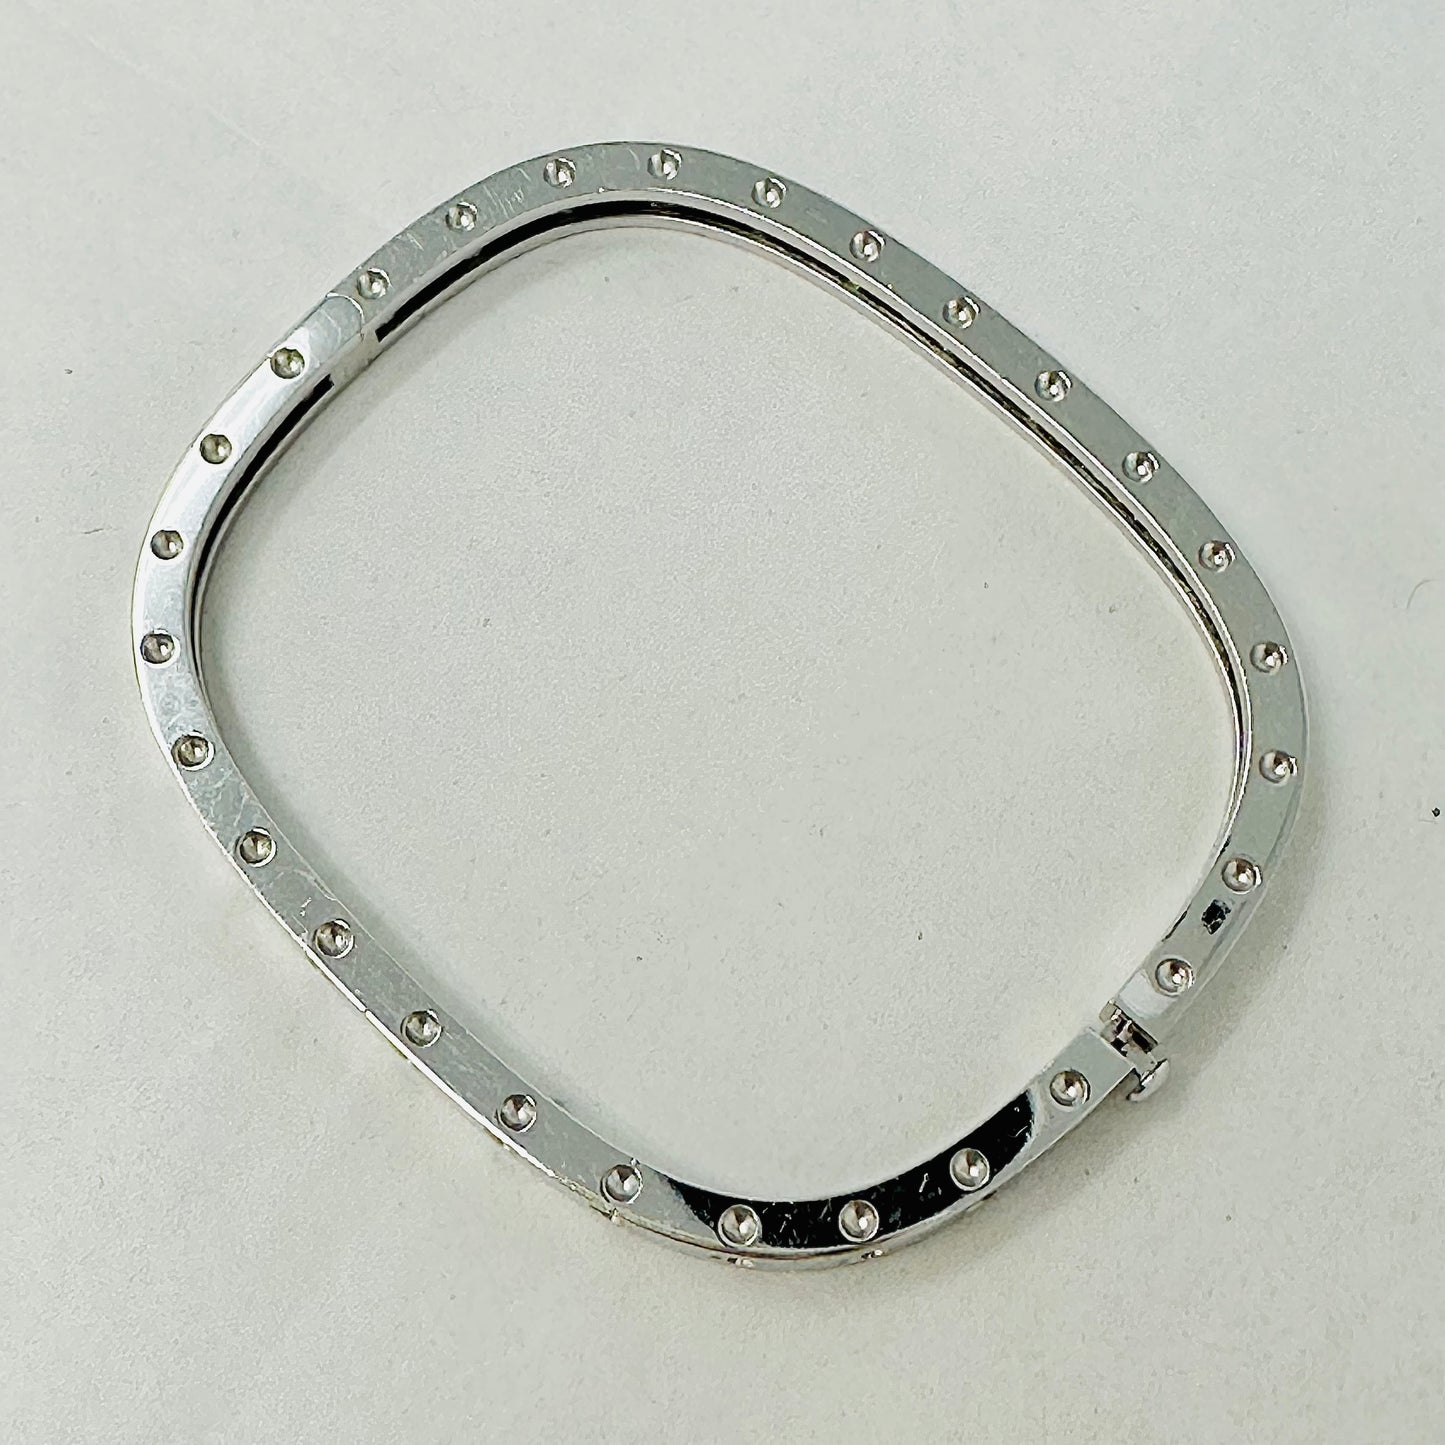 Roberto Coin 18K White Gold Square Hinged Pois Moi Bangle with 0.07ct Diamond